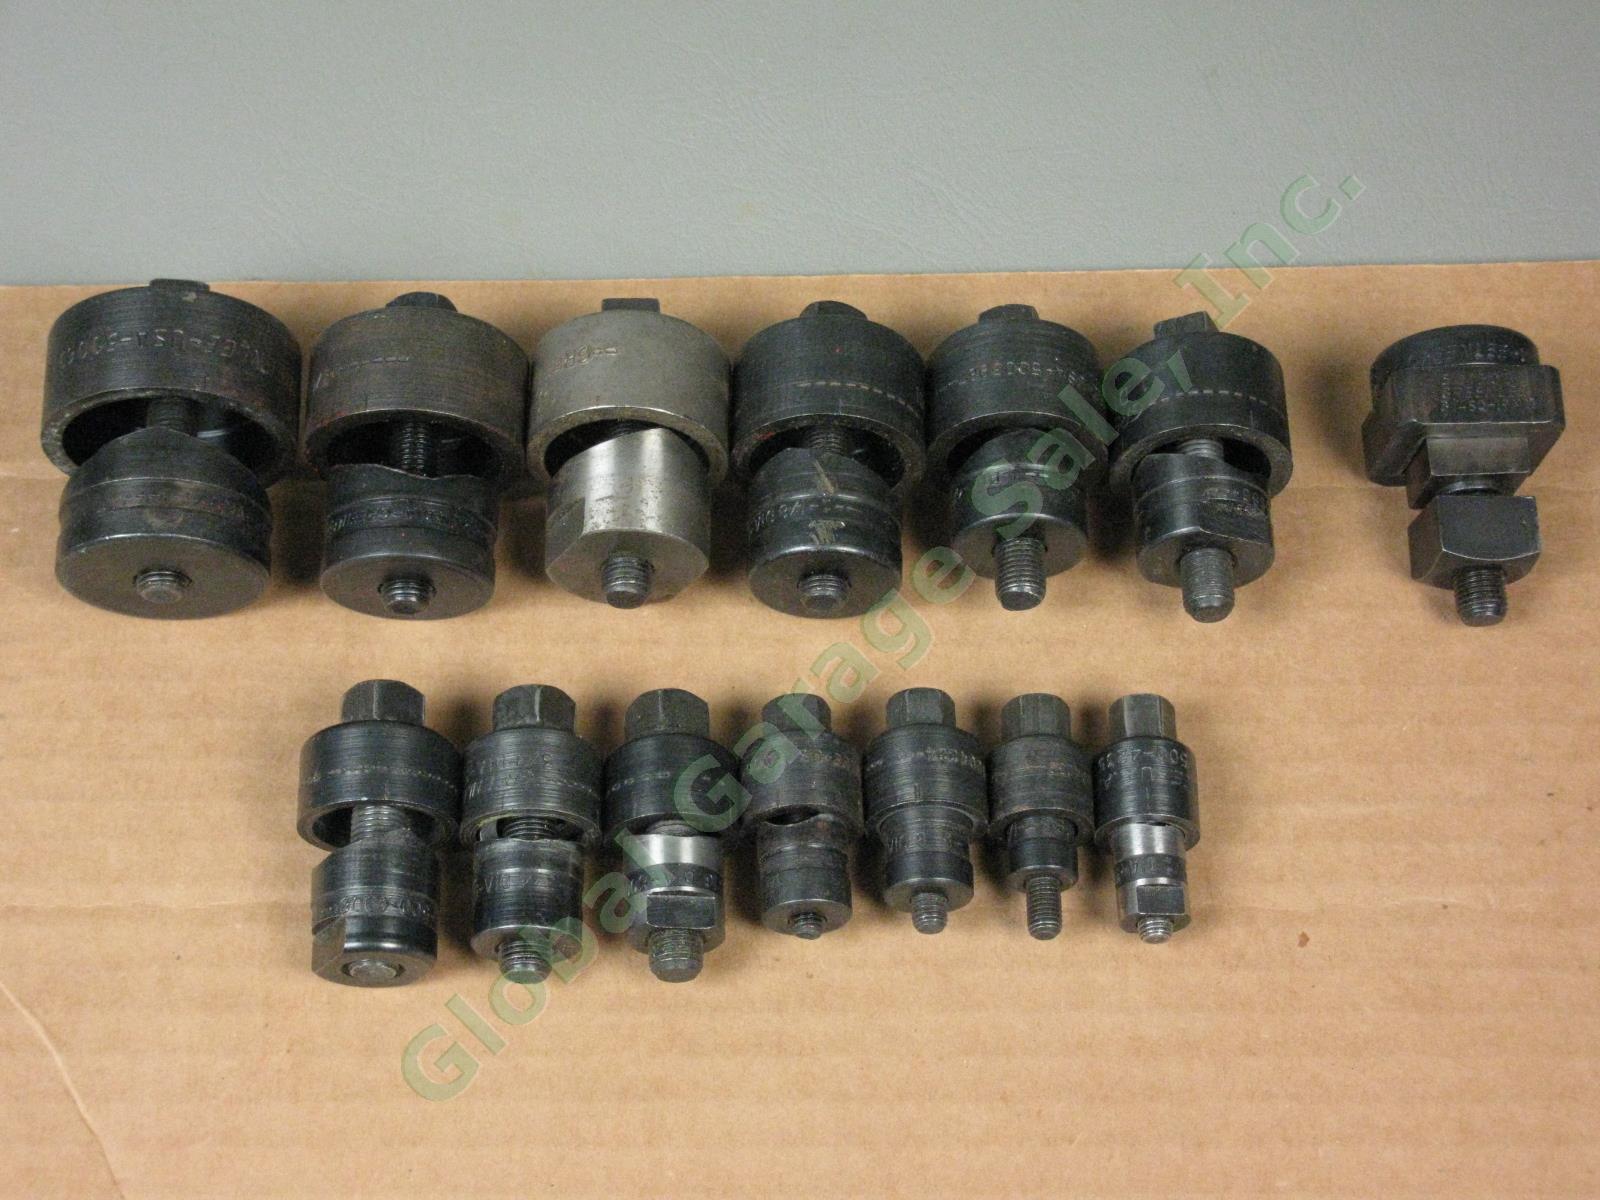 14 Greenlee Round Square Radio Chassis Knockout Punch Lot Set 1 1/2 1/4 3/16 1/8